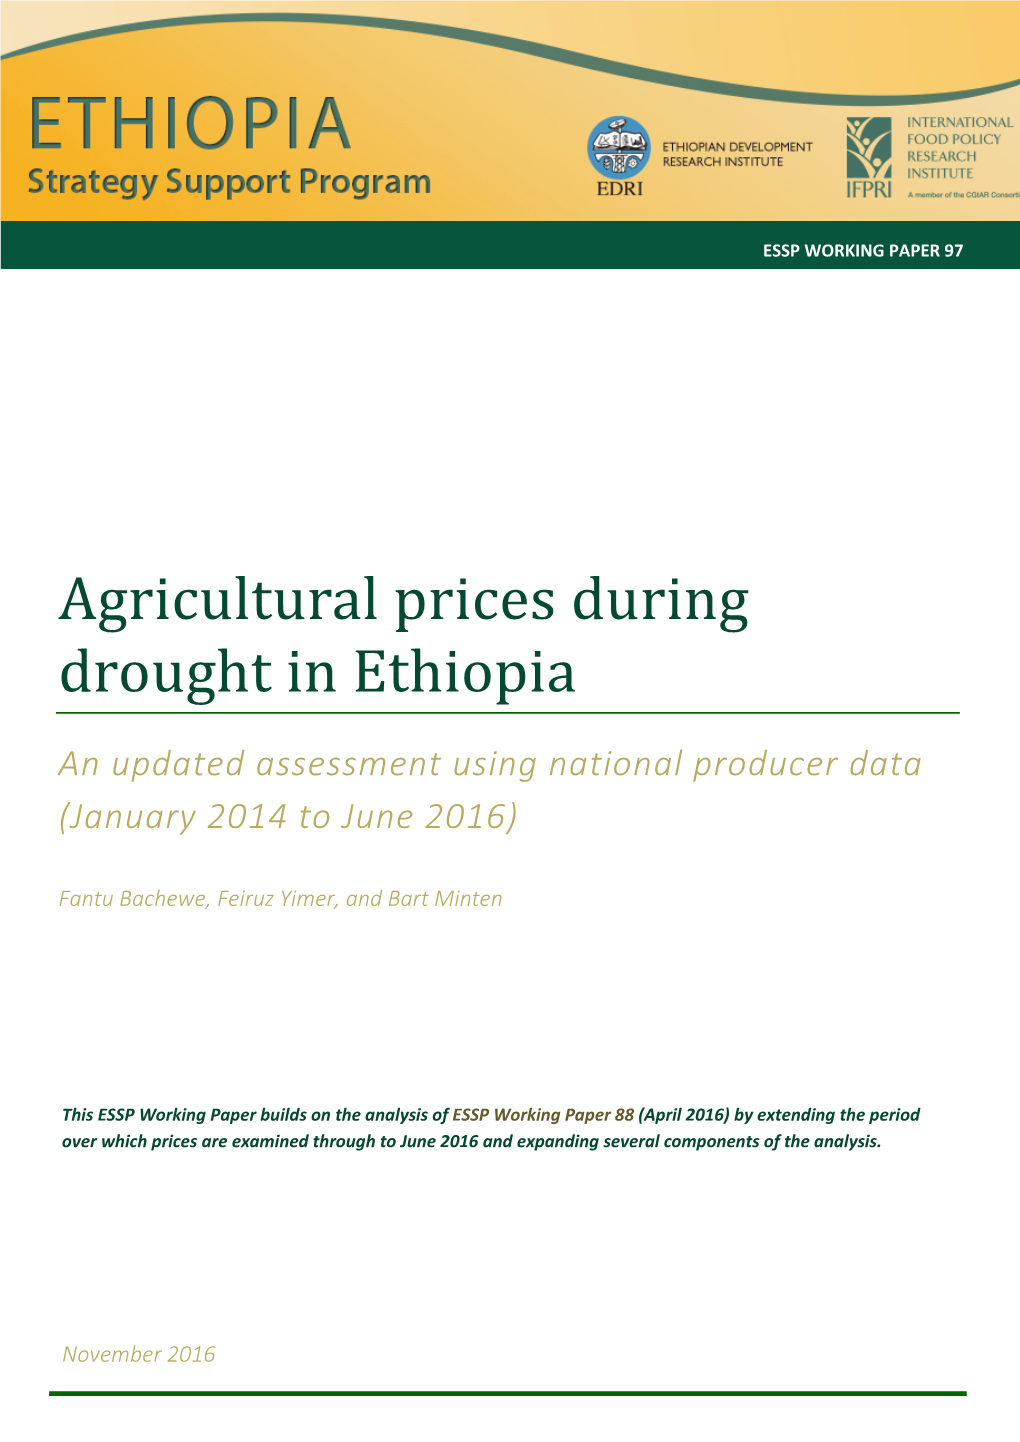 Agricultural Prices During Drought in Ethiopia